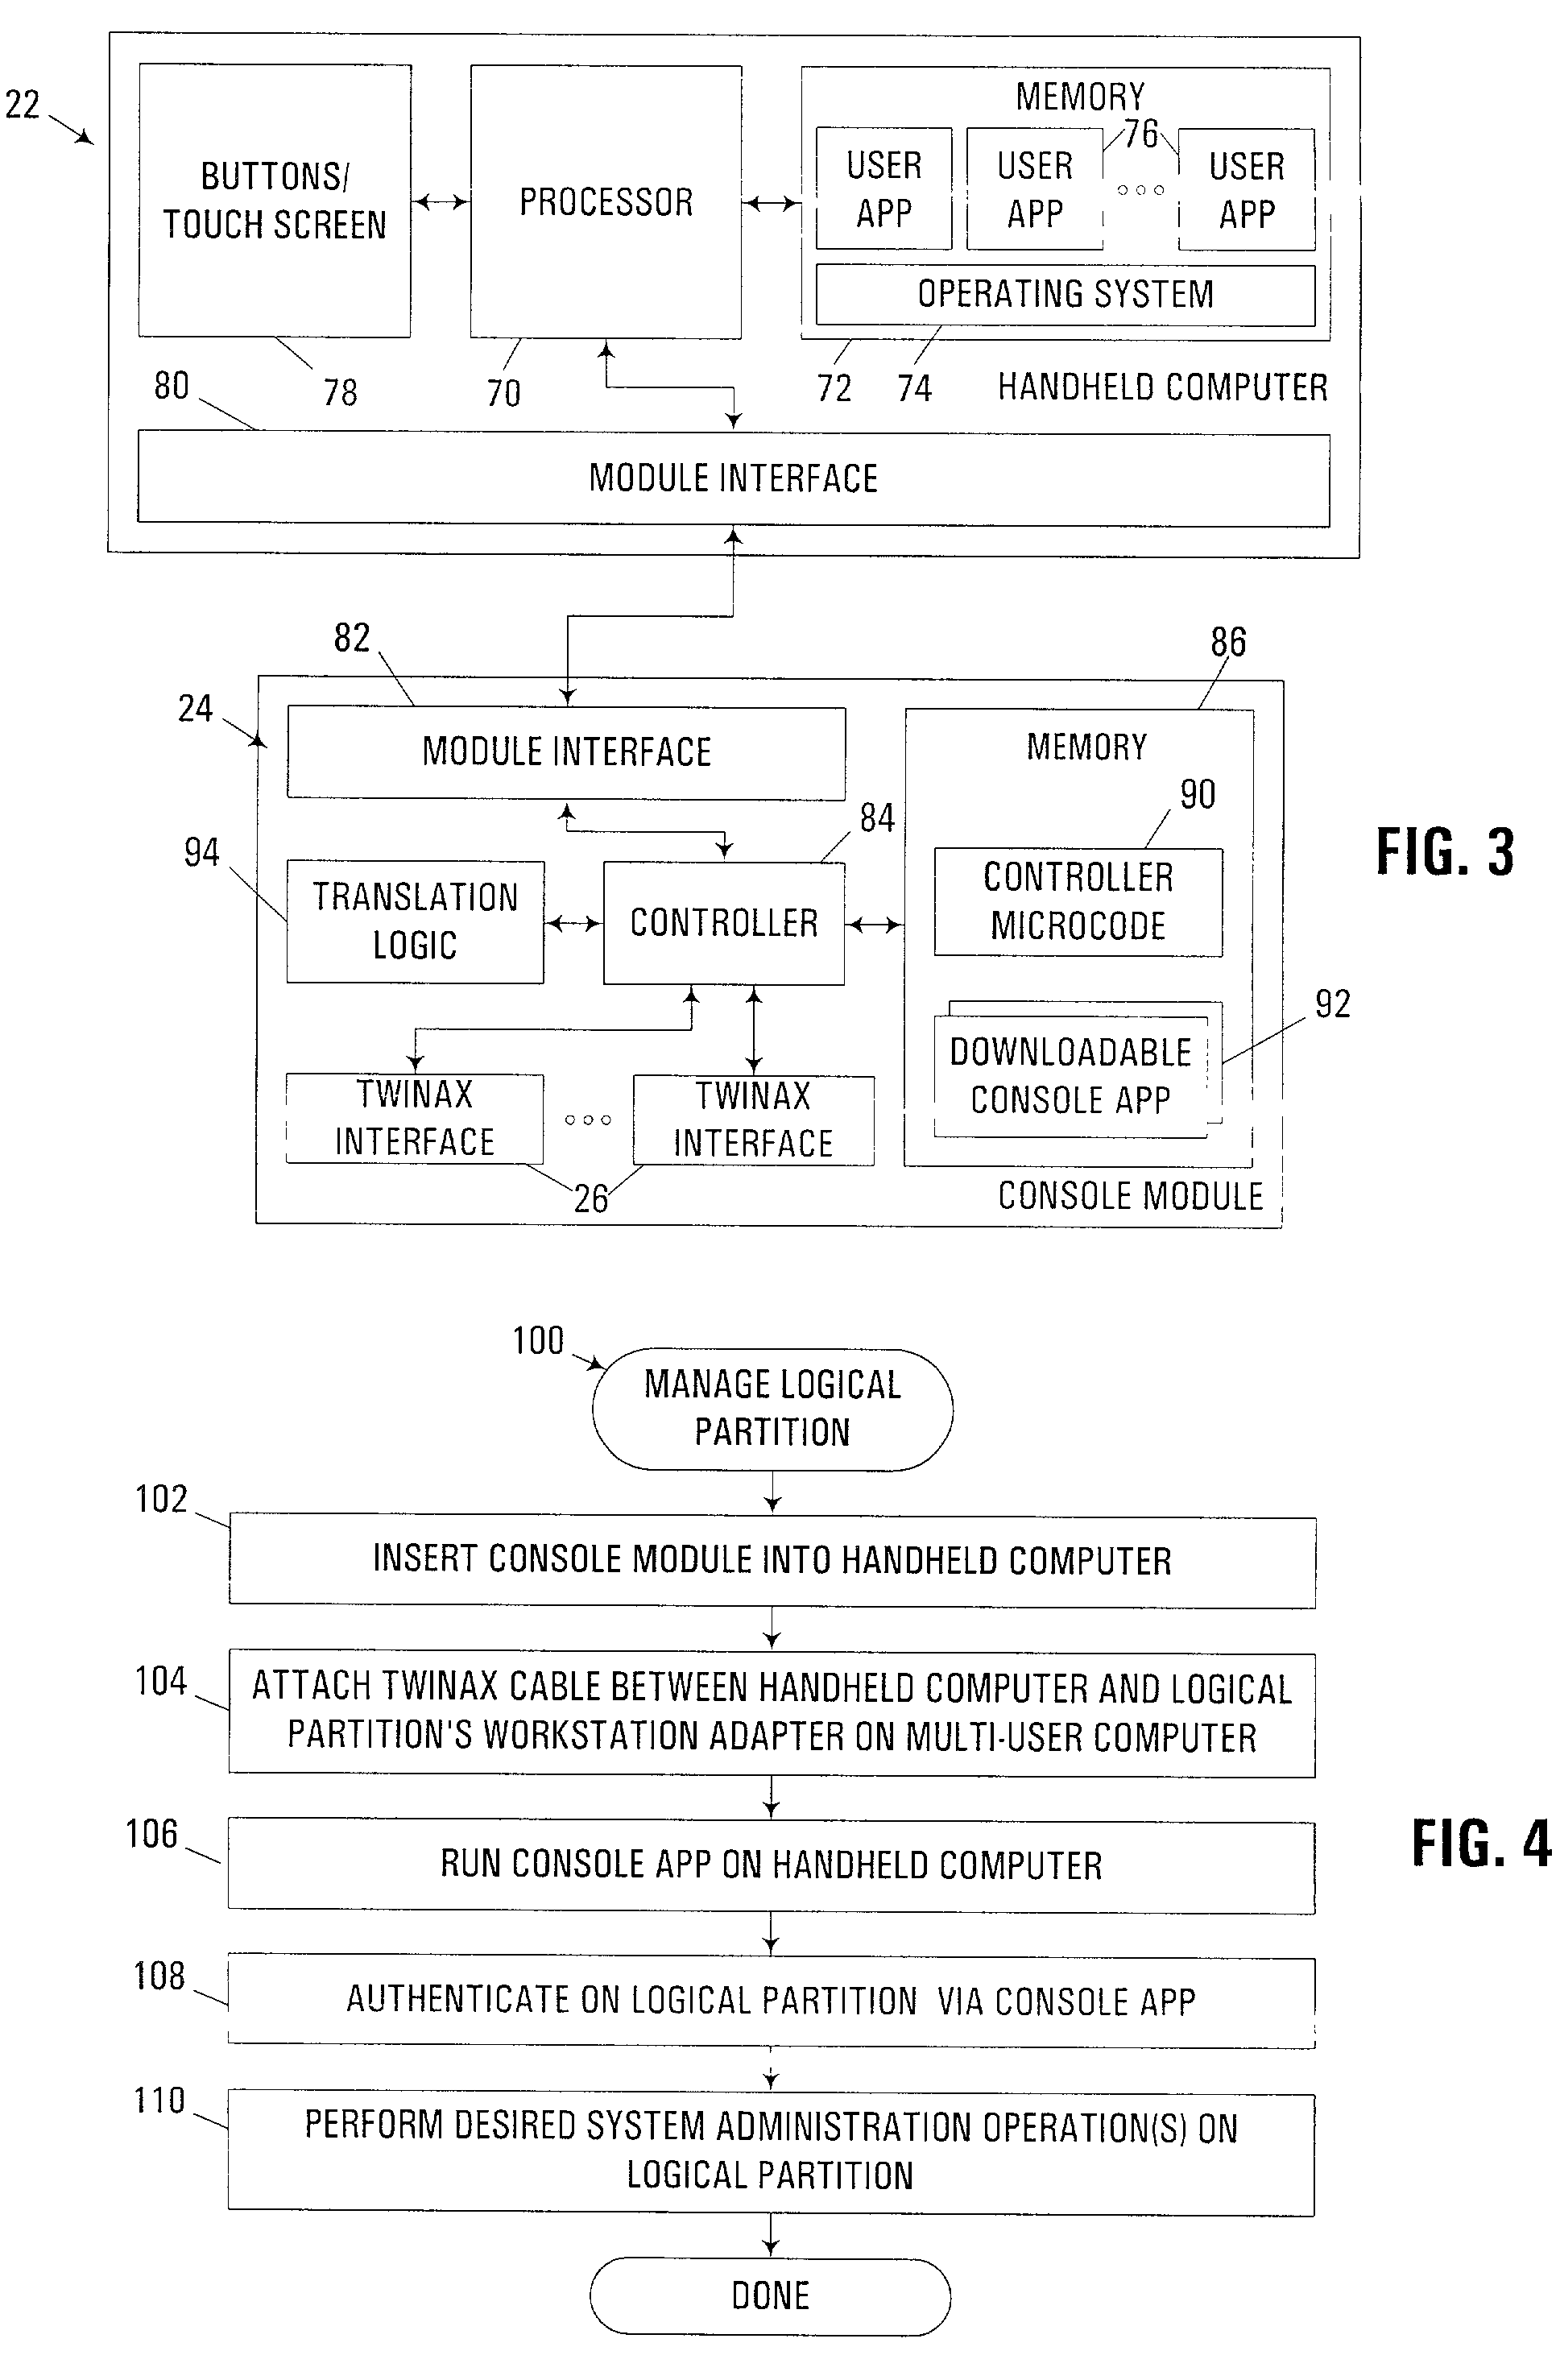 Handheld computer console emulation module and method of managing a logically-partitioned multi-user computer with same